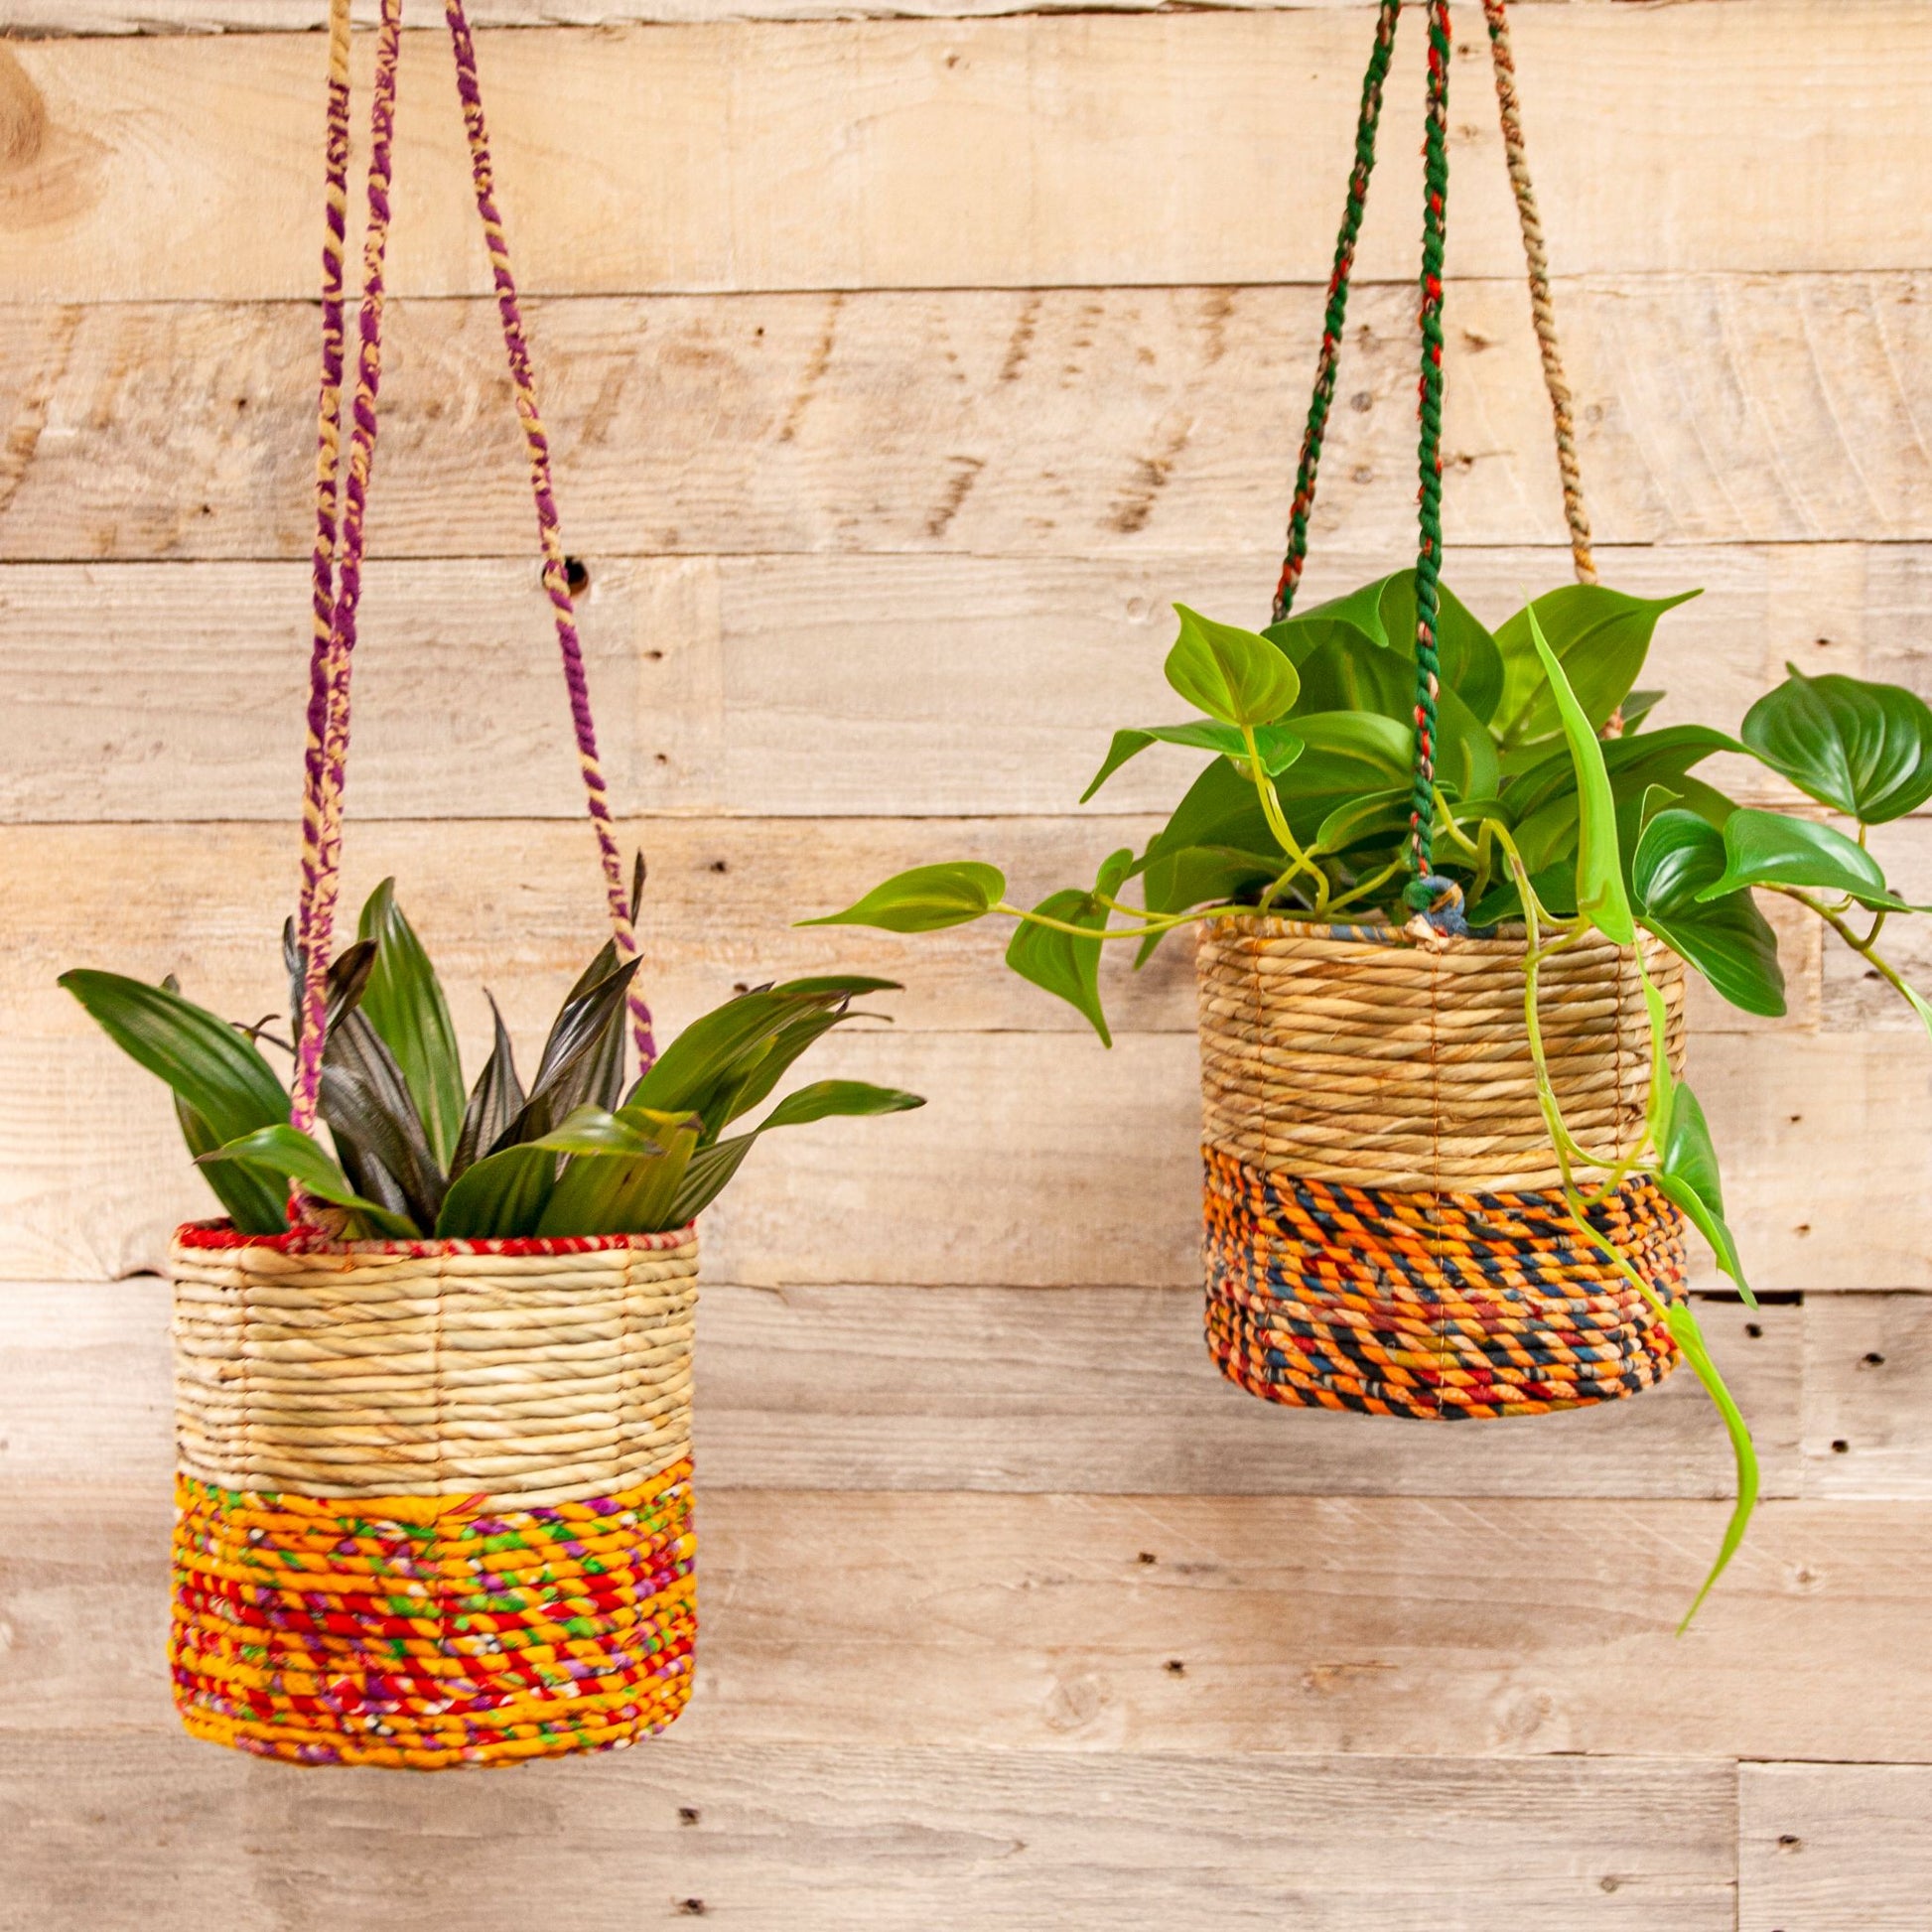 Artisan Hanging Planter - Round - two designs shown with plants